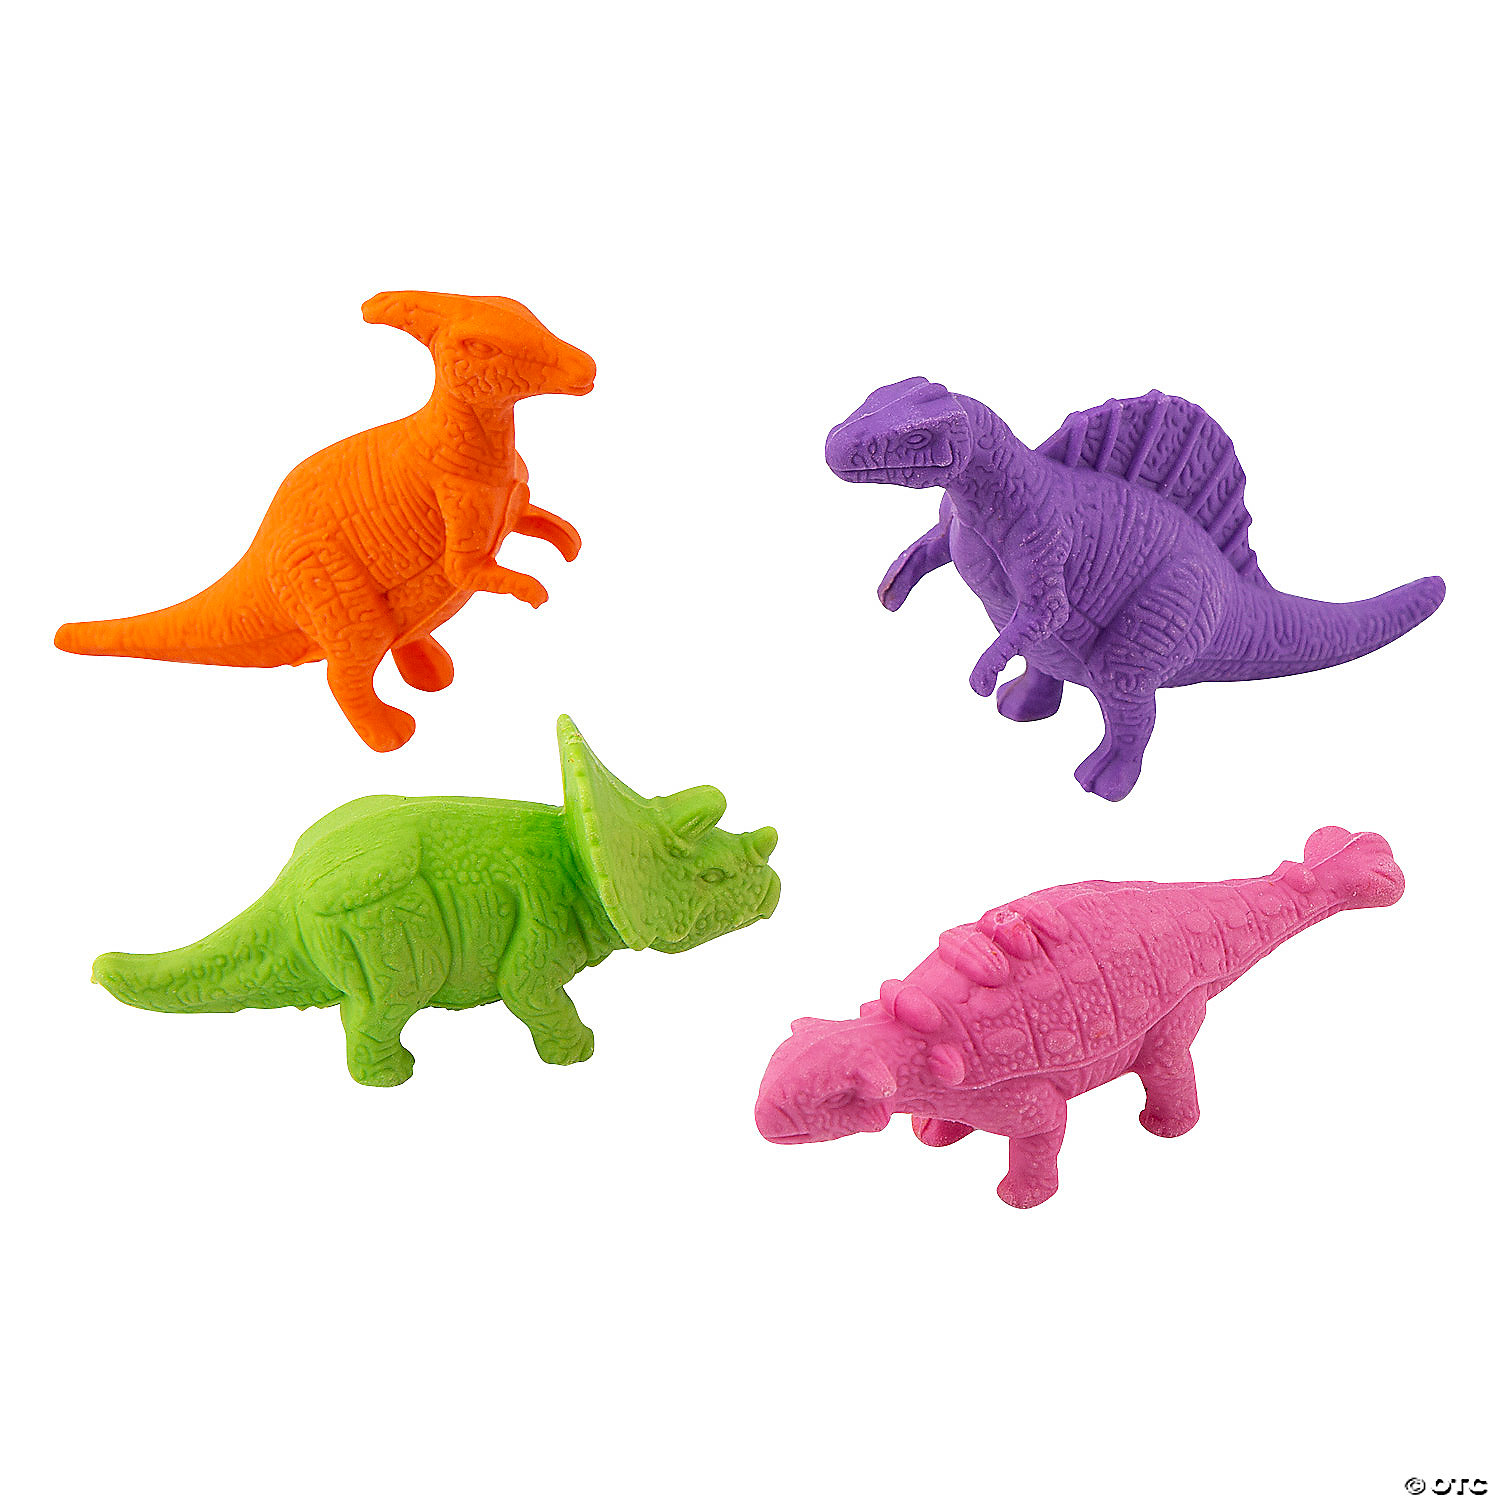 Details about   16 Ct Dinosaur Shaped Erasers Sprits Brand New 